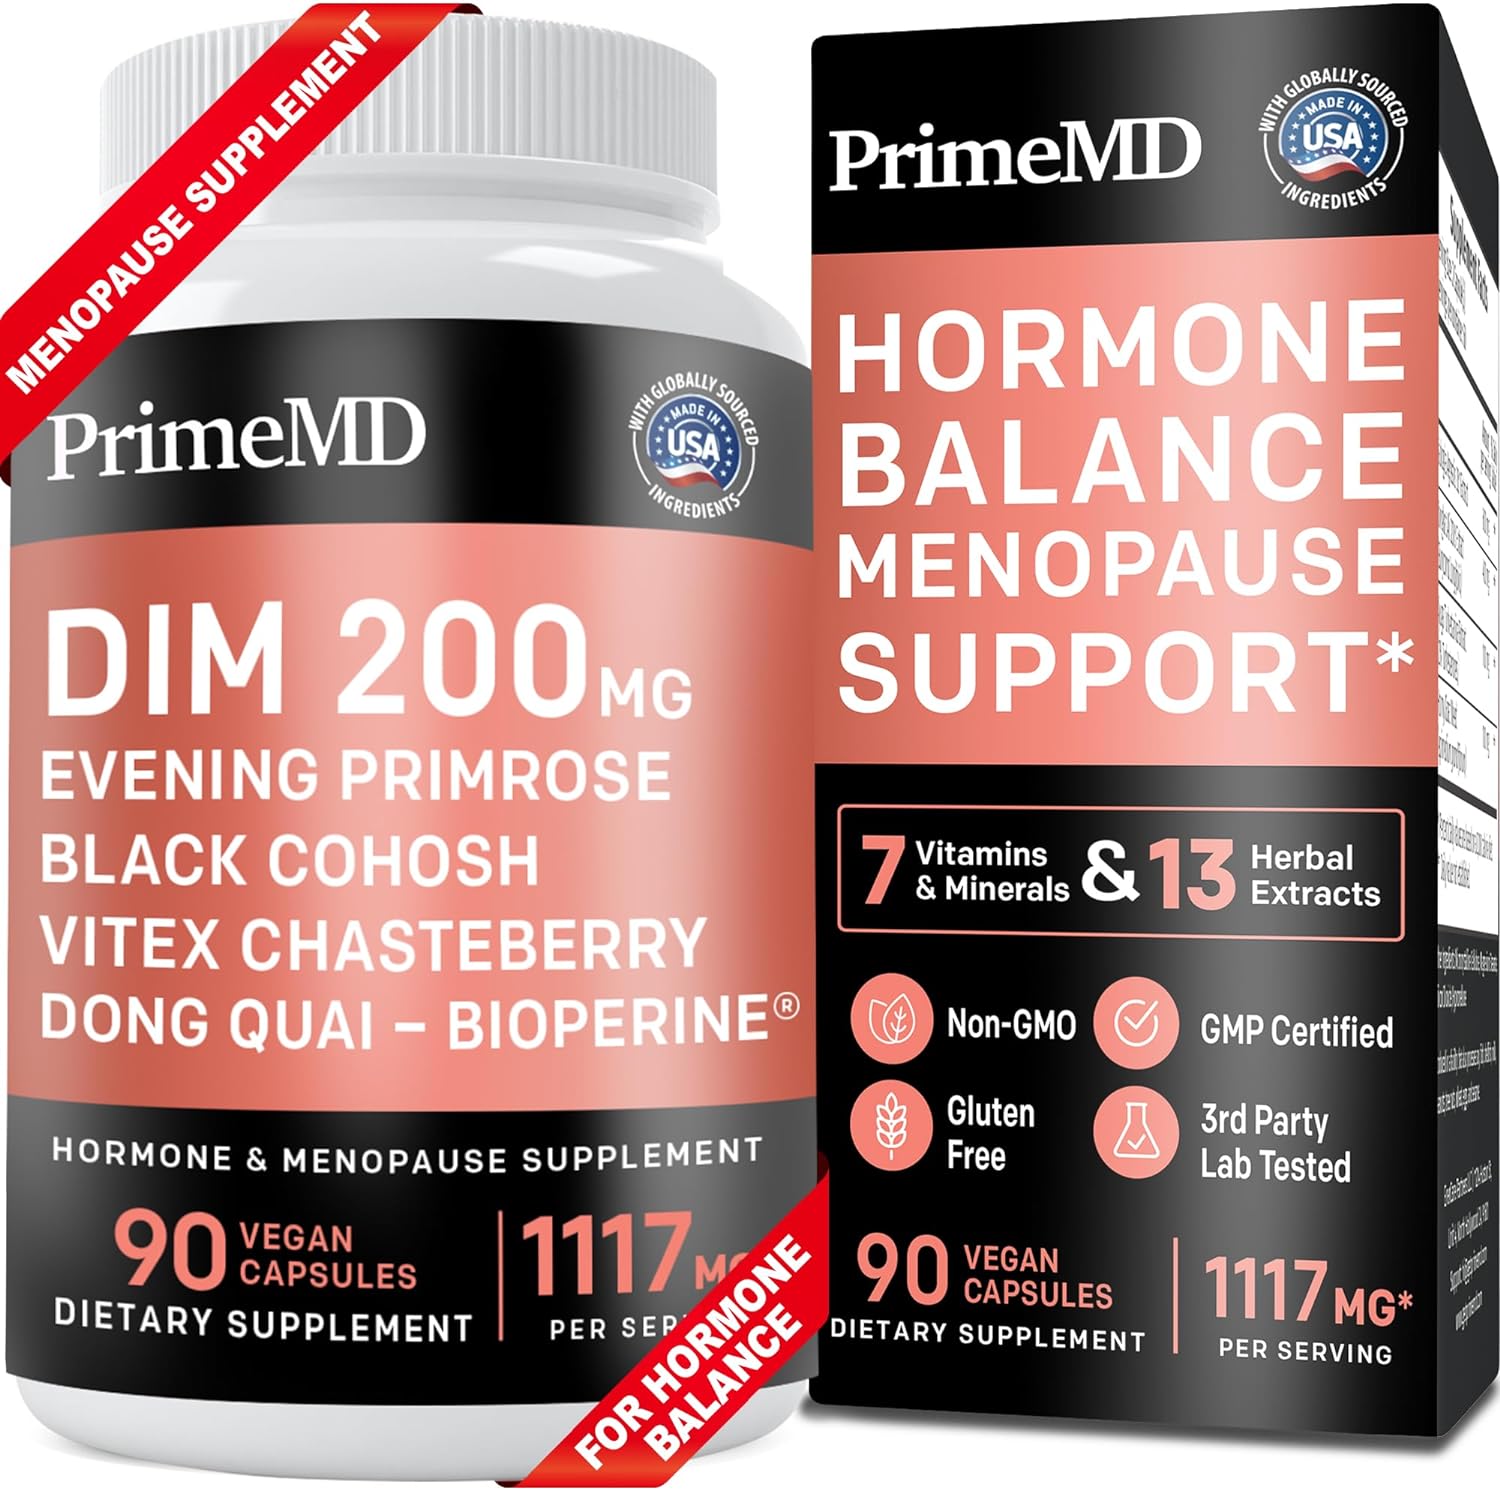 20-in-1 Menopause Supplements for Women - Dim Supplement Women - Estrogen Supplement for Women - Black Cohosh for Menopause Hot Flashes Menopause Relief for Women - Perimenopause Supplements Women